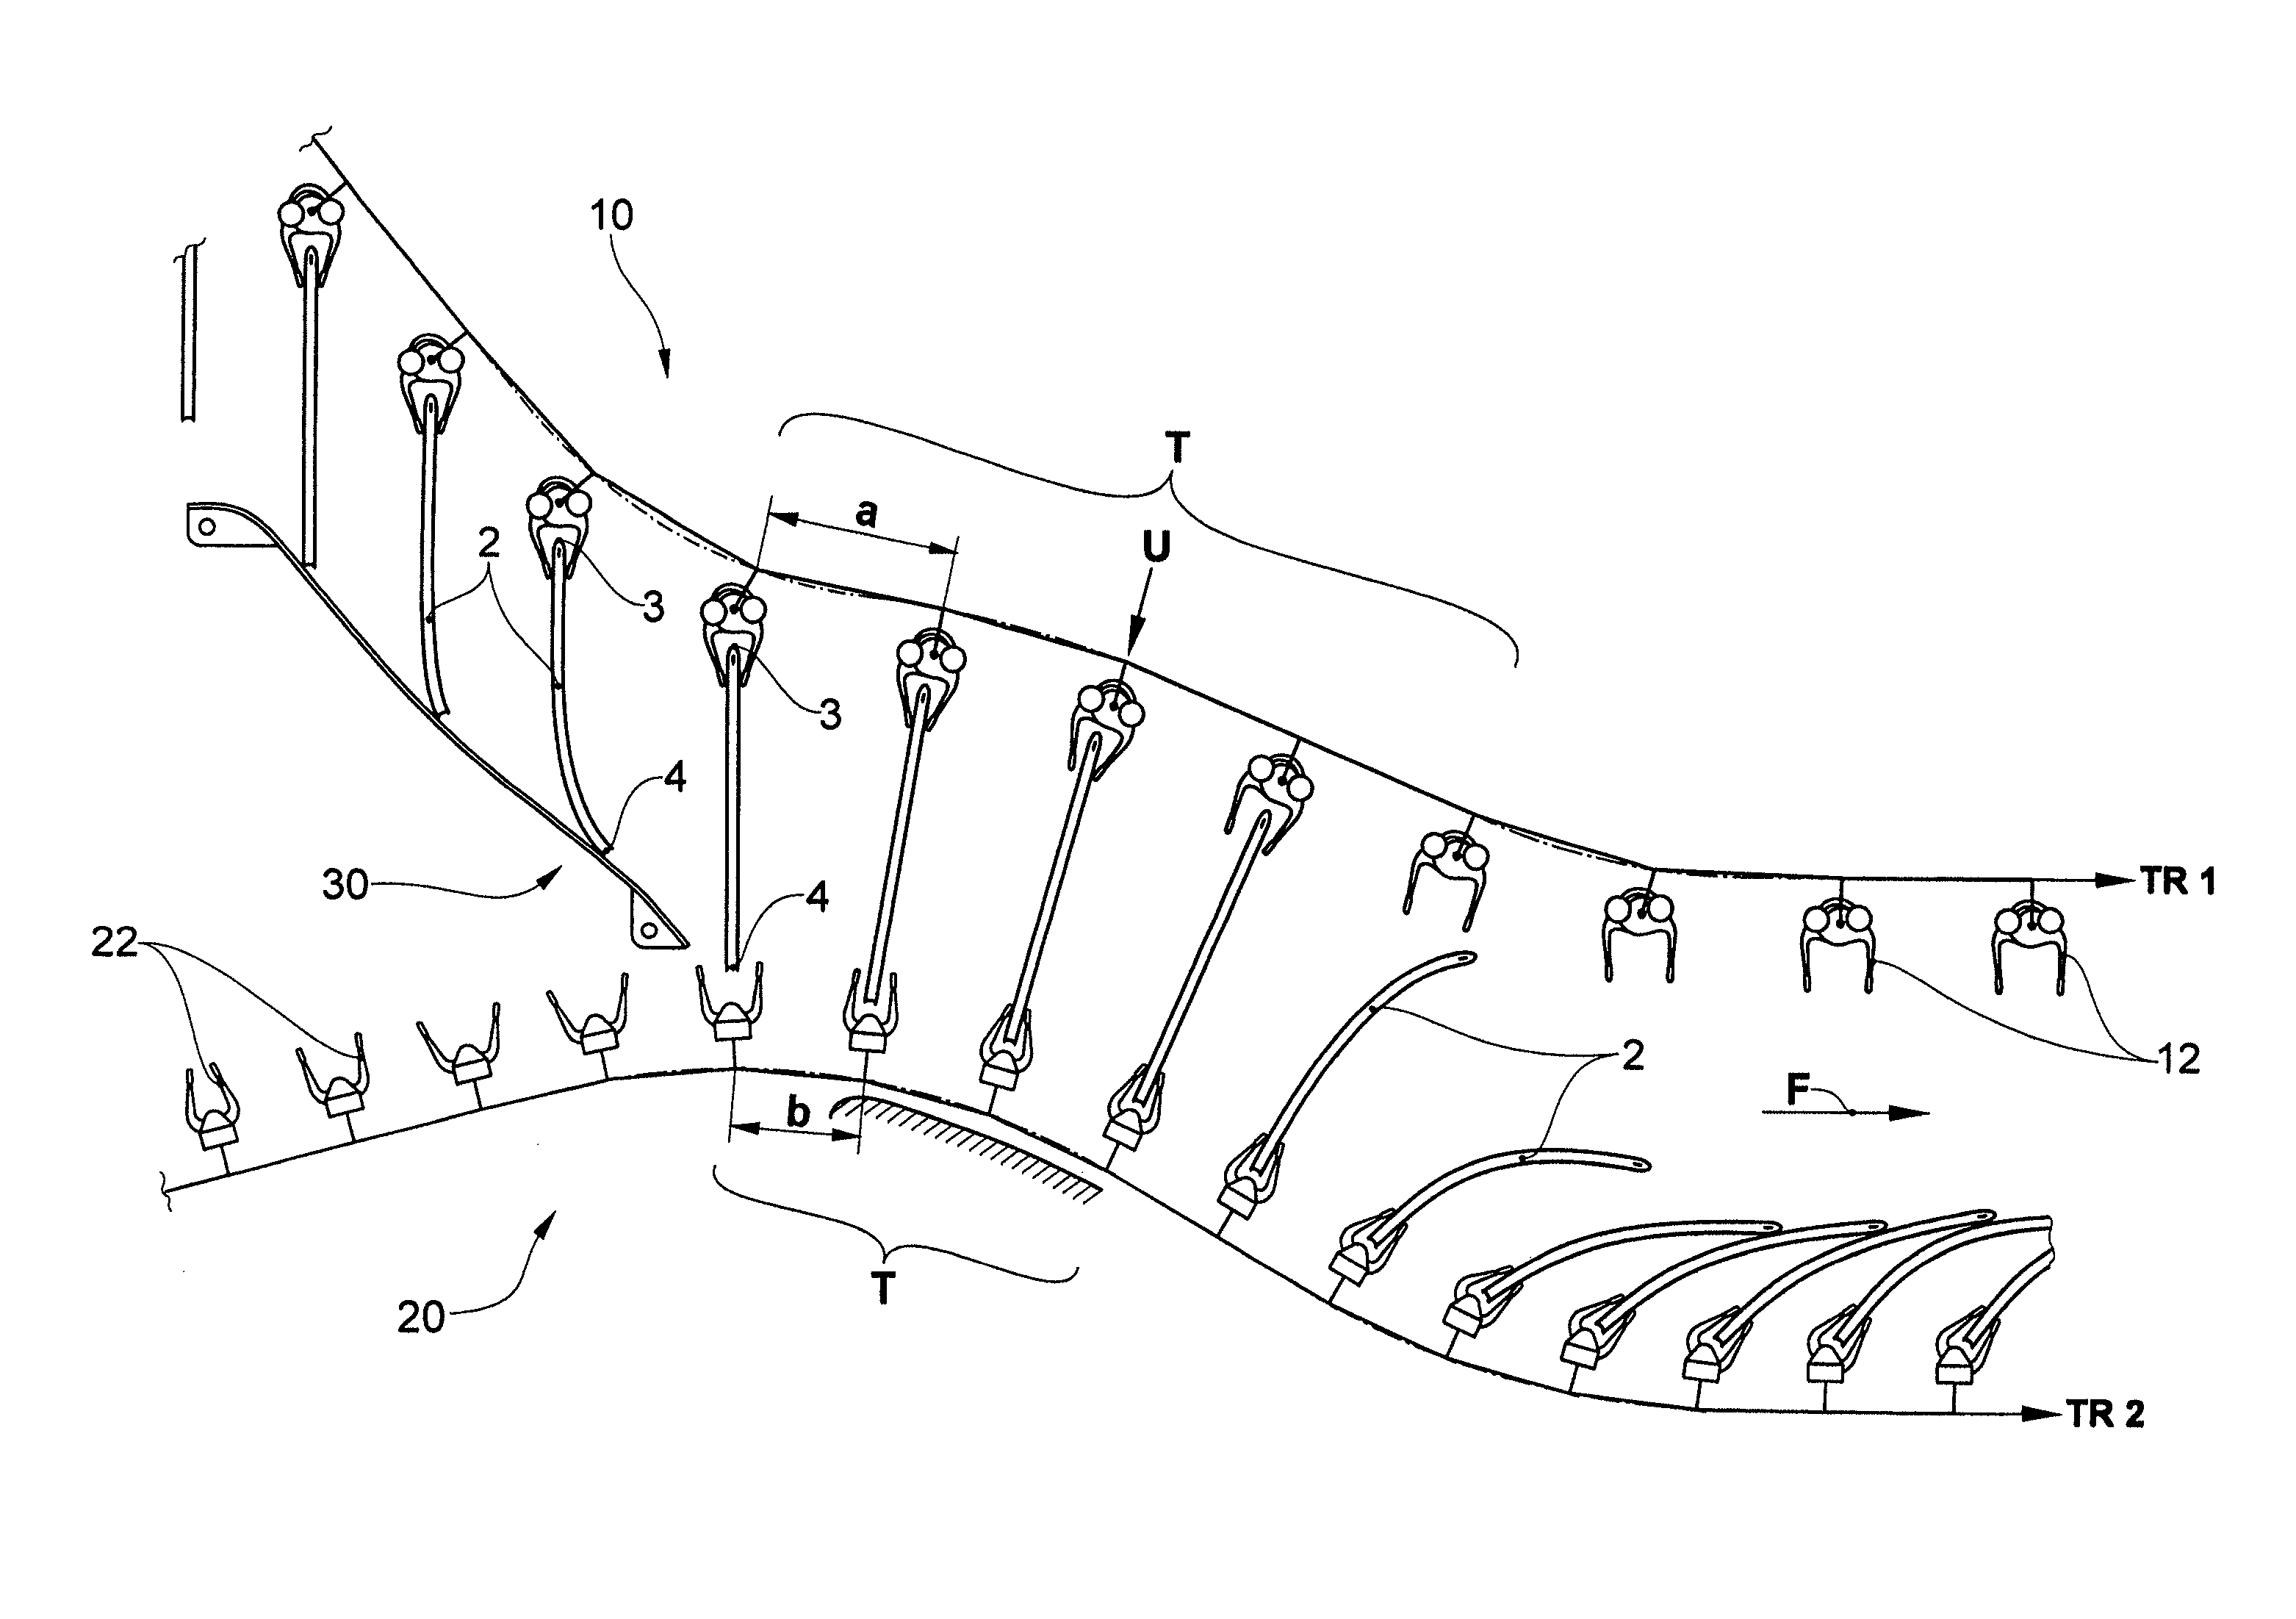 Device and method for the transfer of flexible flat articles